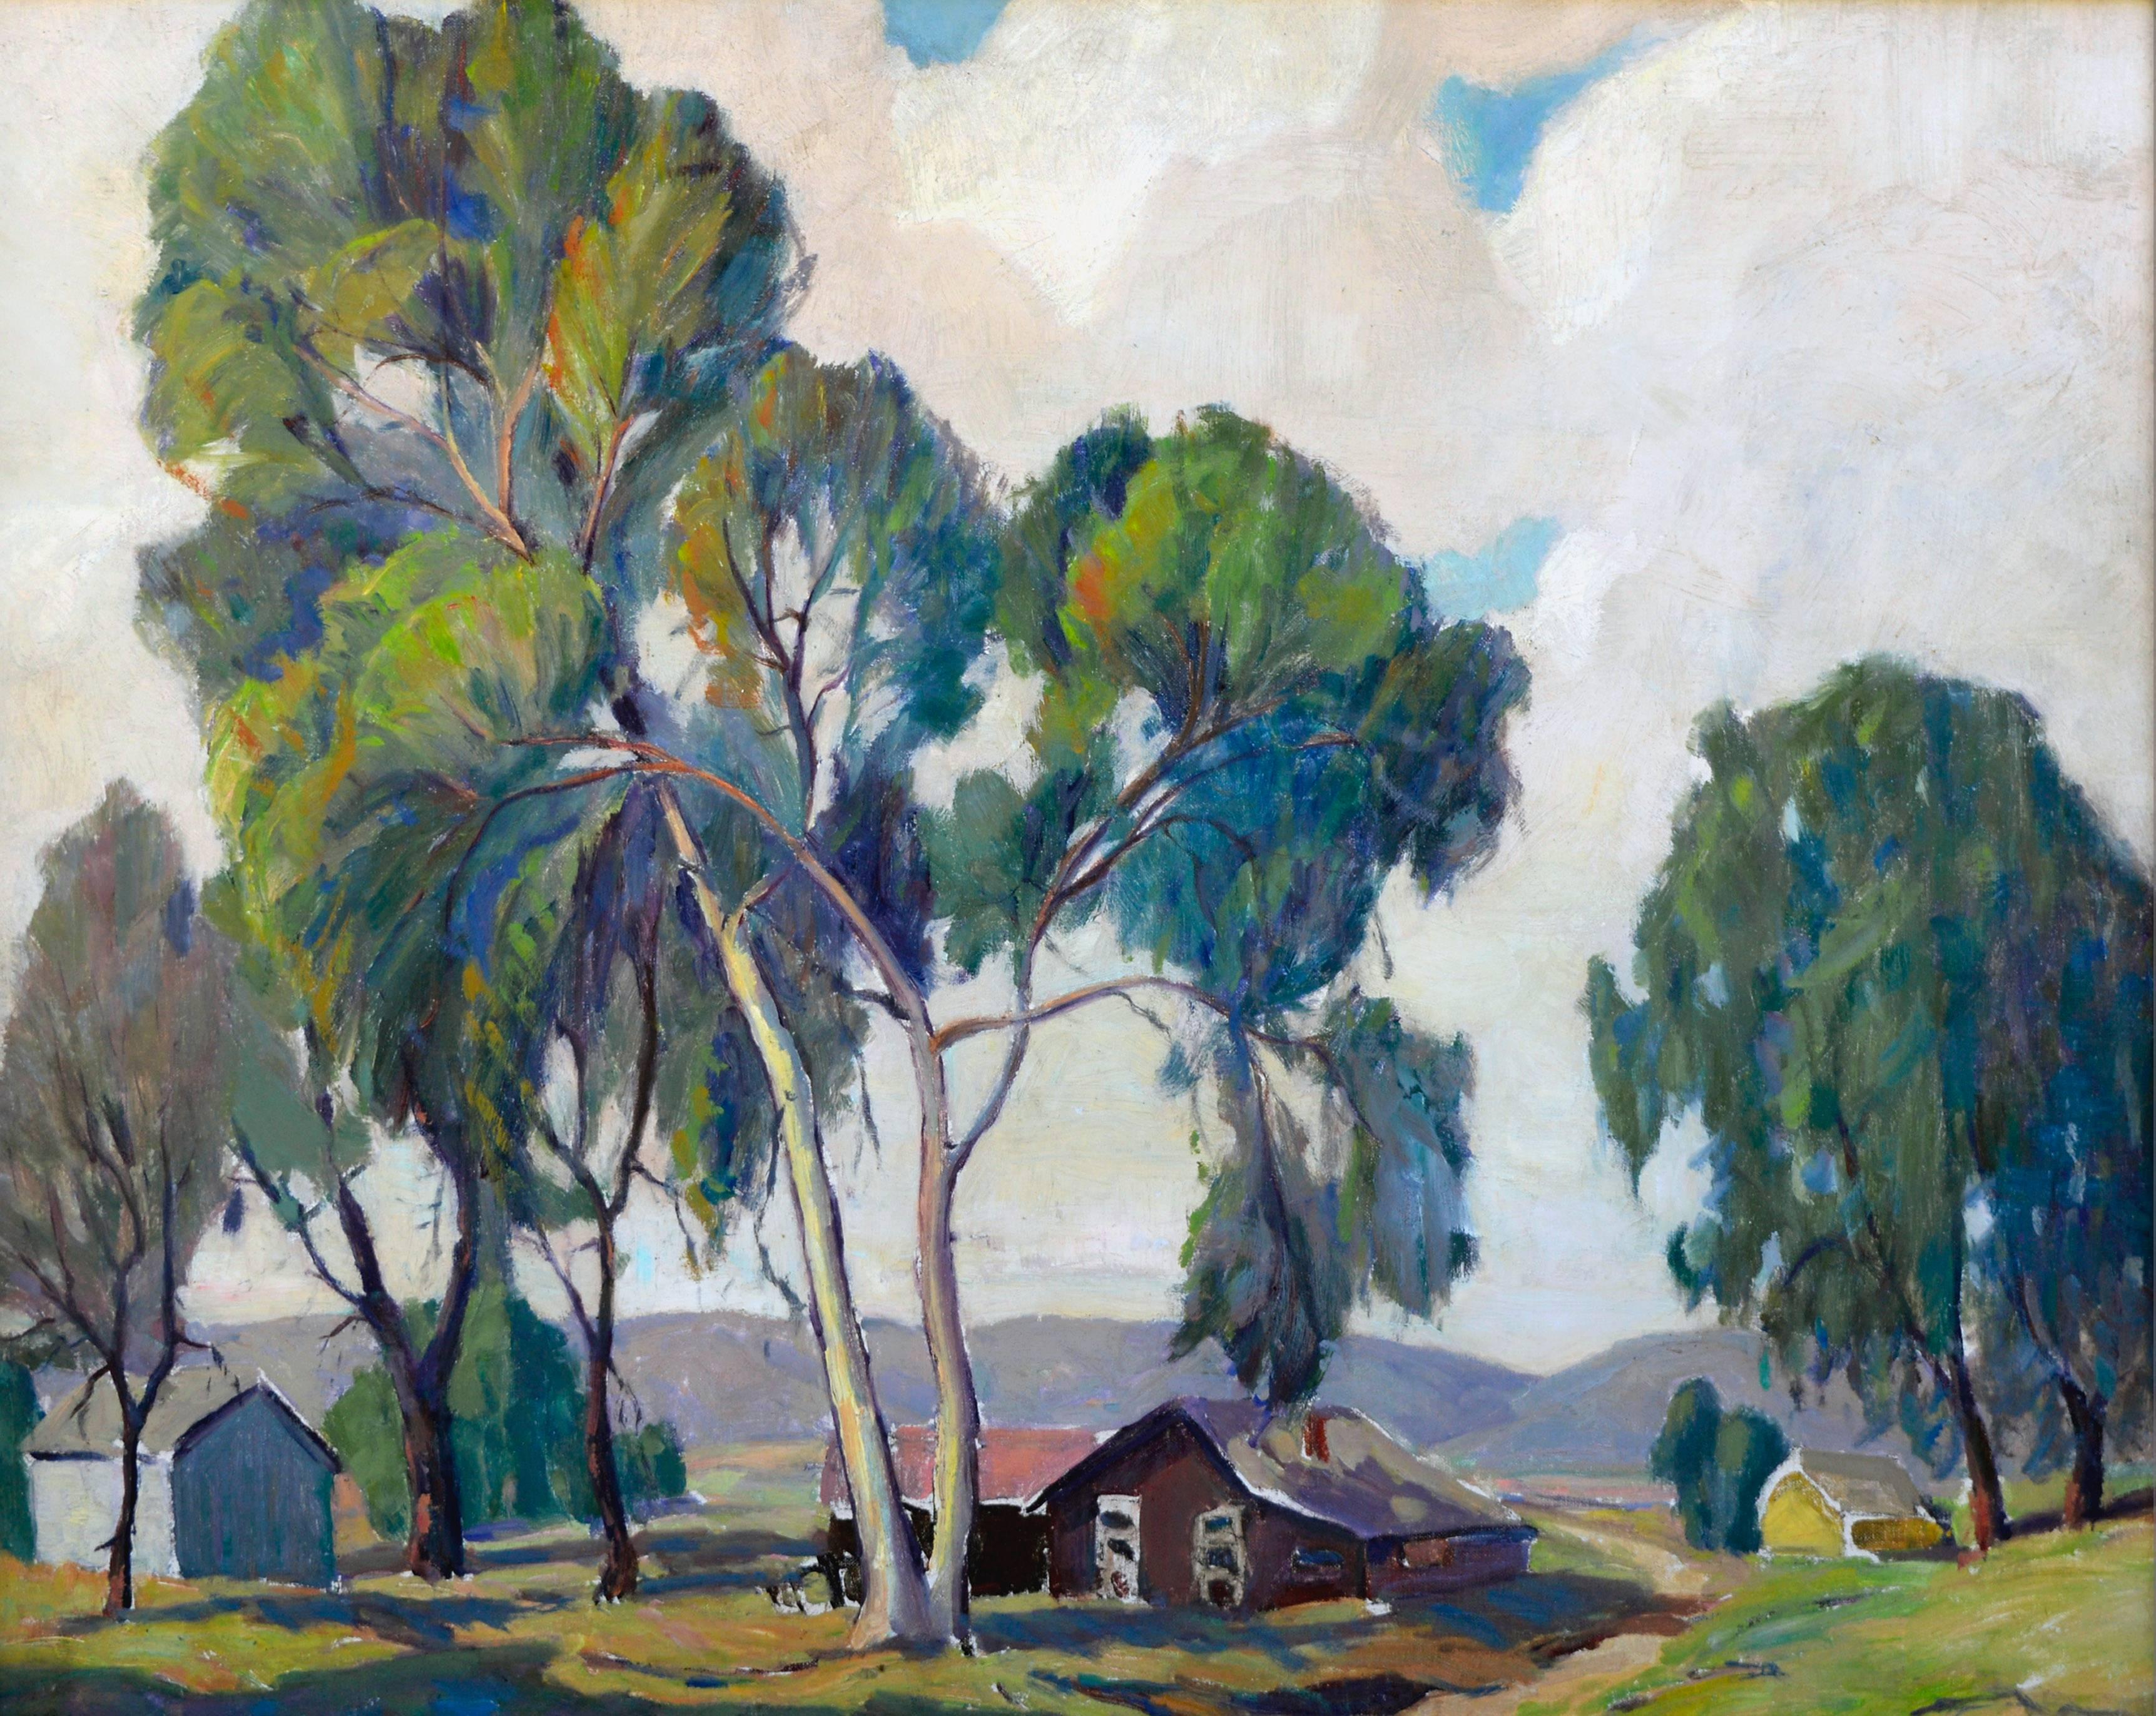 Farm in the Hills Landscape  - Painting by Marie Boening Kendall